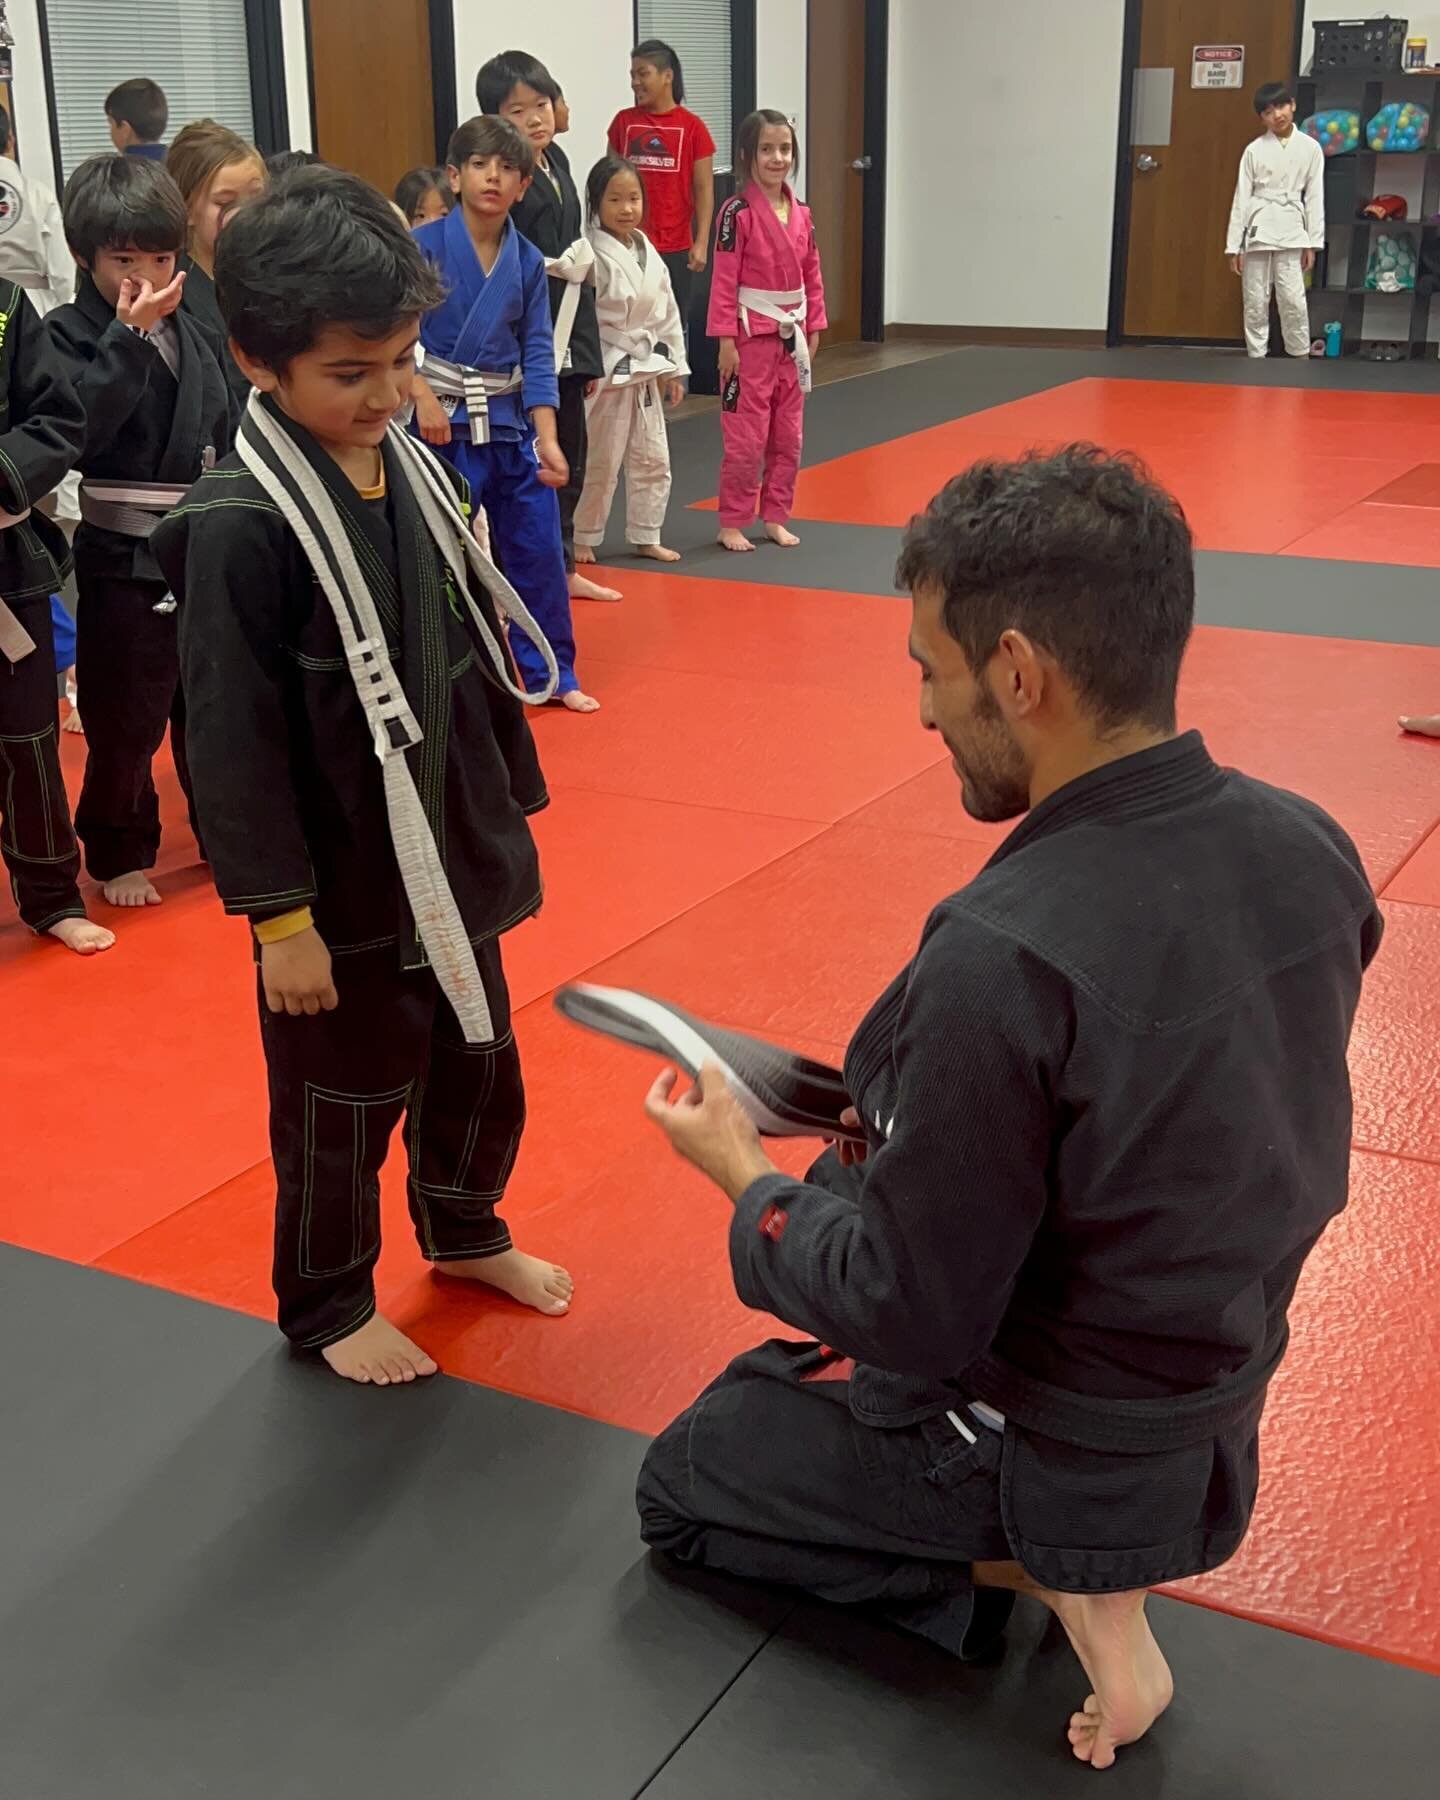 Congratulations on your grey/white belt Dhrumit! Another well deserved/earned promotion.